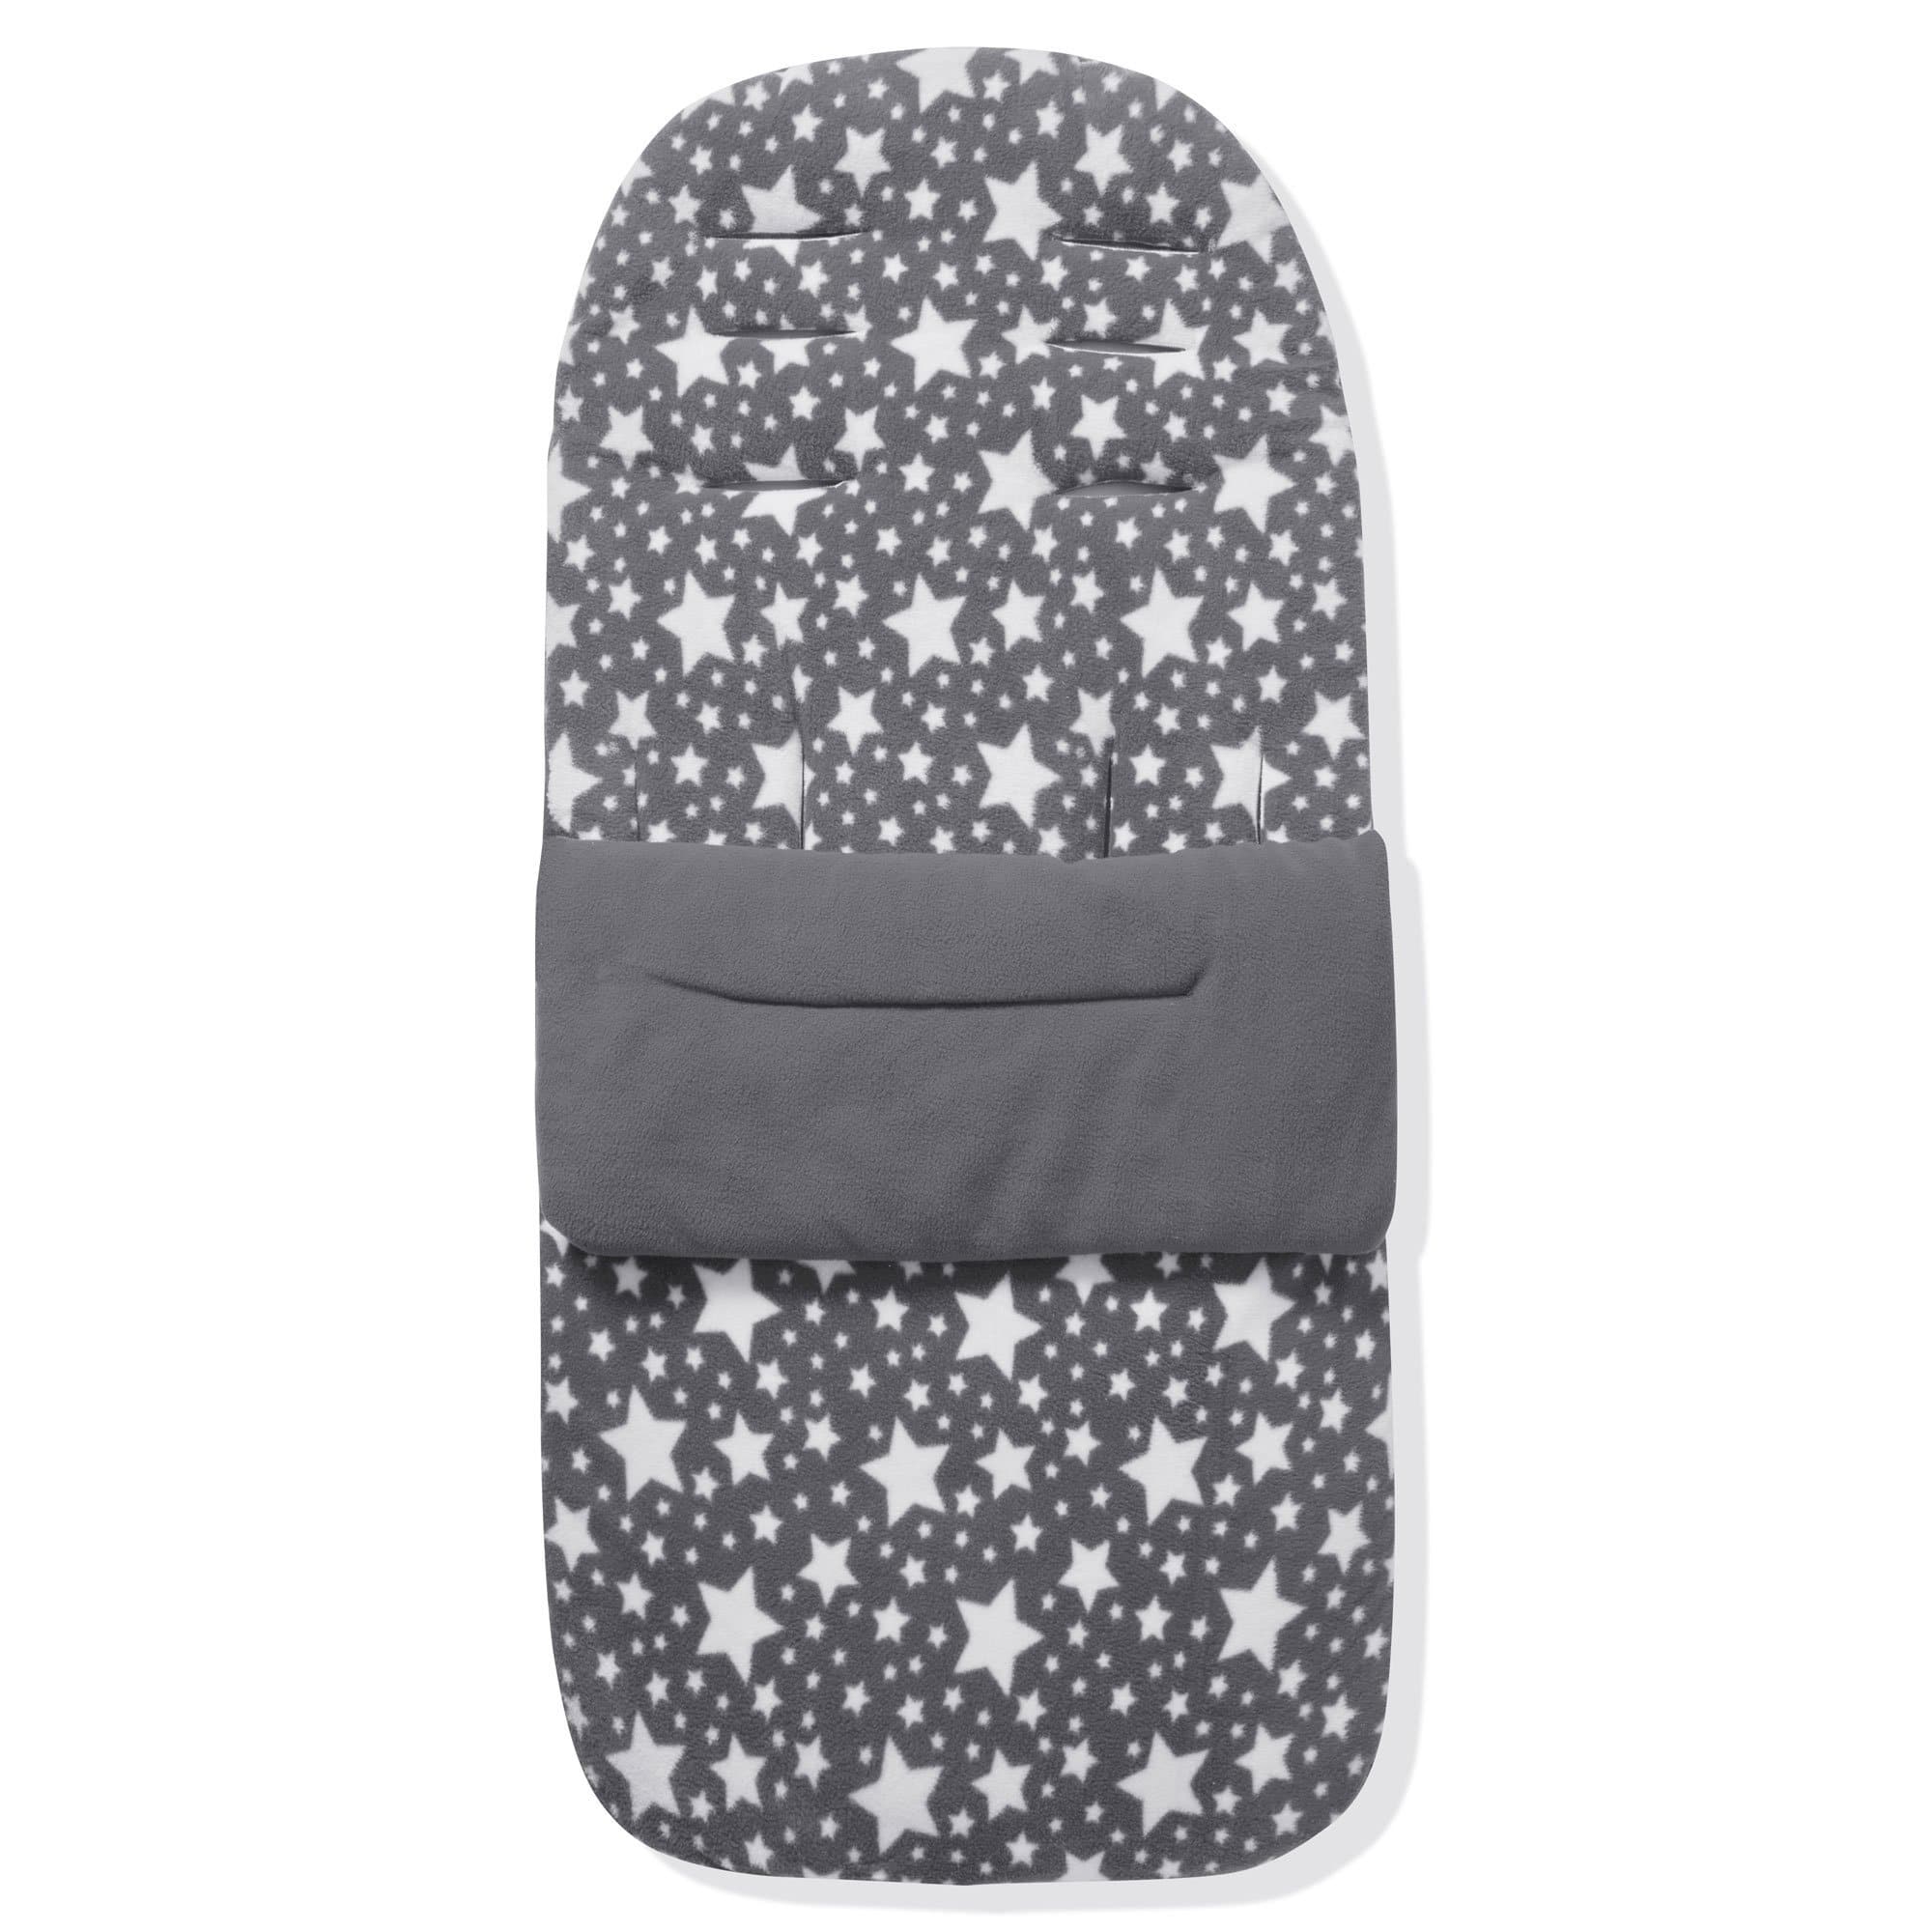 Fleece Footmuff / Cosy Toes Compatible with Jane - Grey Star / Fits All Models | For Your Little One